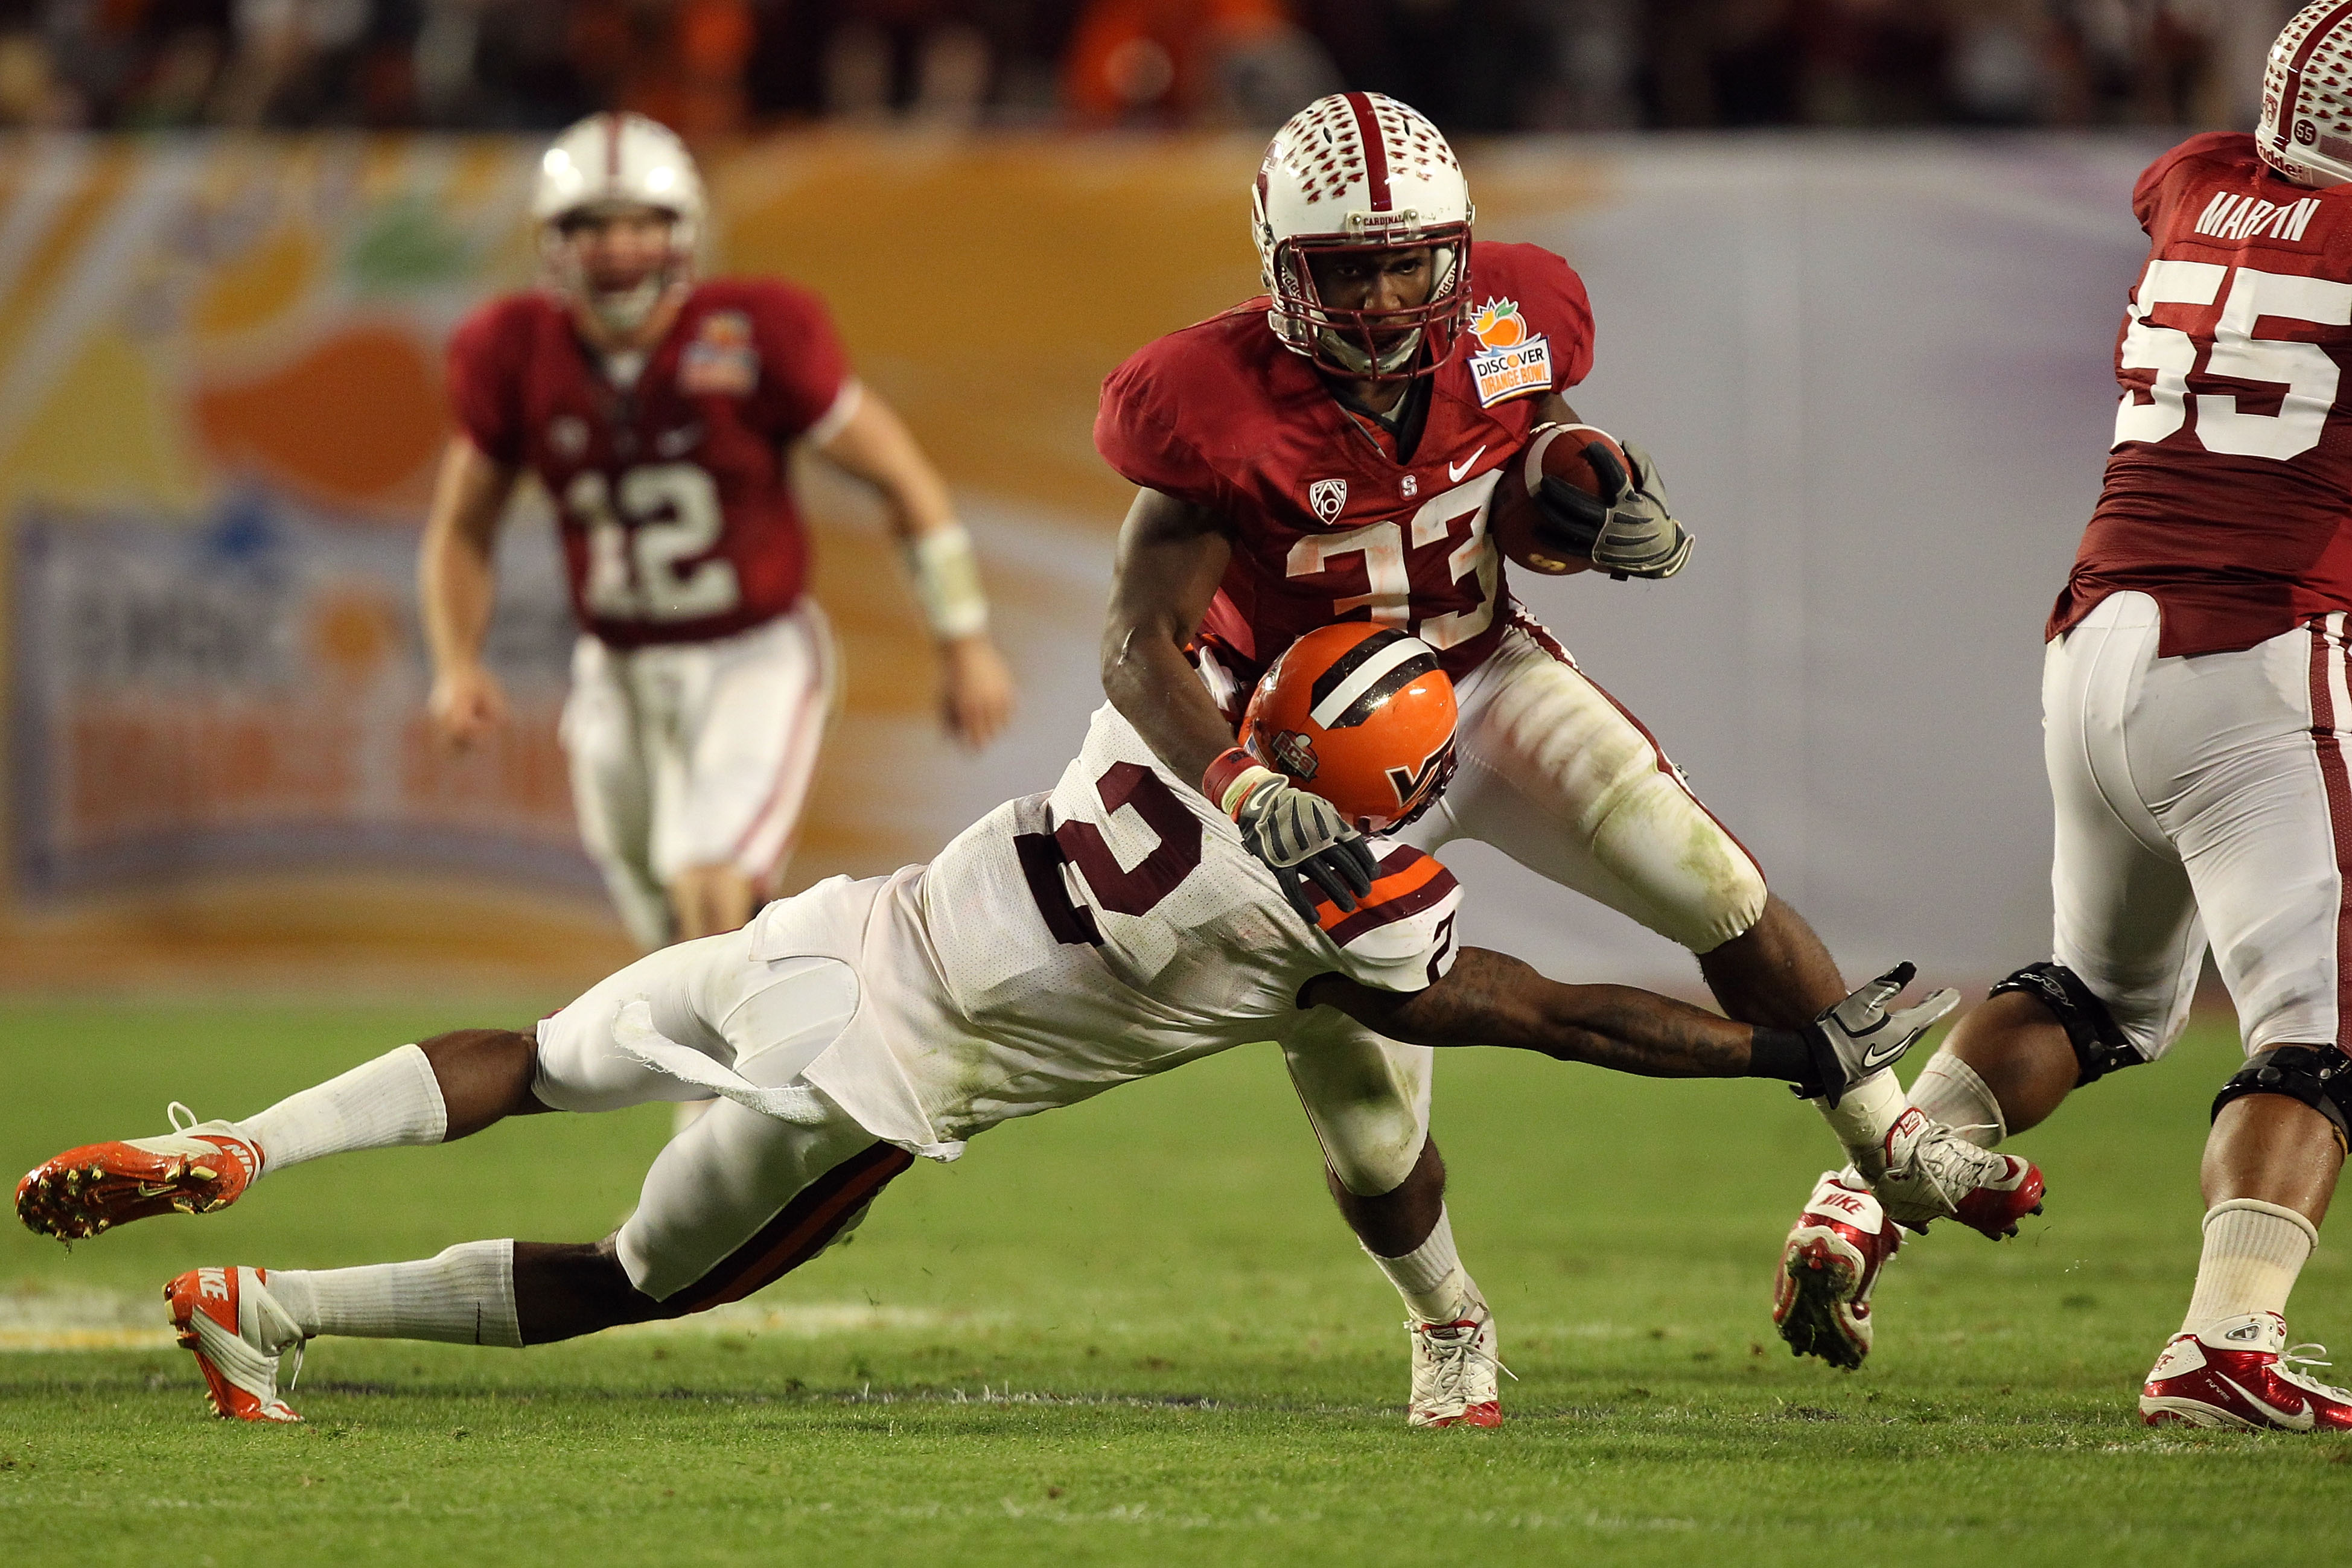 MIAMI, FL - JANUARY 03:  Stepfan Taylor #33 of the Stanford Cardinal runs the ball against Davon Morgan #2 of the Virginai Tech Hokies during the 2011 Discover Orange Bowl at Sun Life Stadium on January 3, 2011 in Miami, Florida.  (Photo by Streeter Lecka